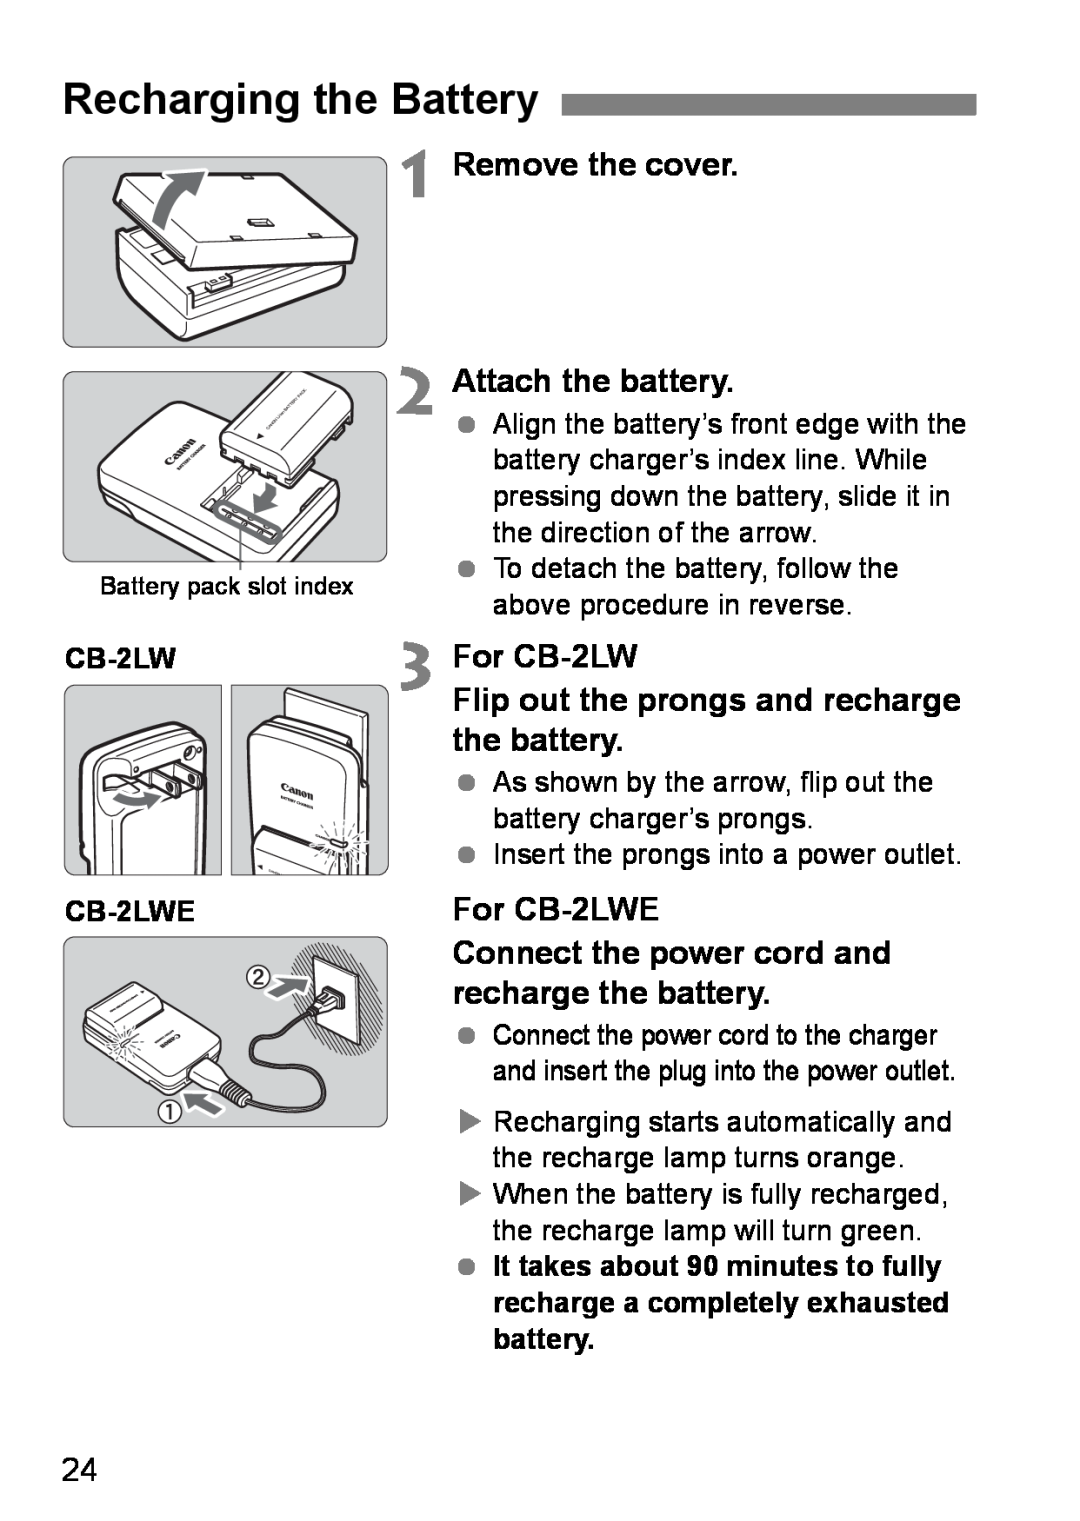 Canon EOS DIGITAL REBEL XTI Recharging the Battery, Remove the cover, Attach the battery, For CB-2LWE, CB-2LW3 